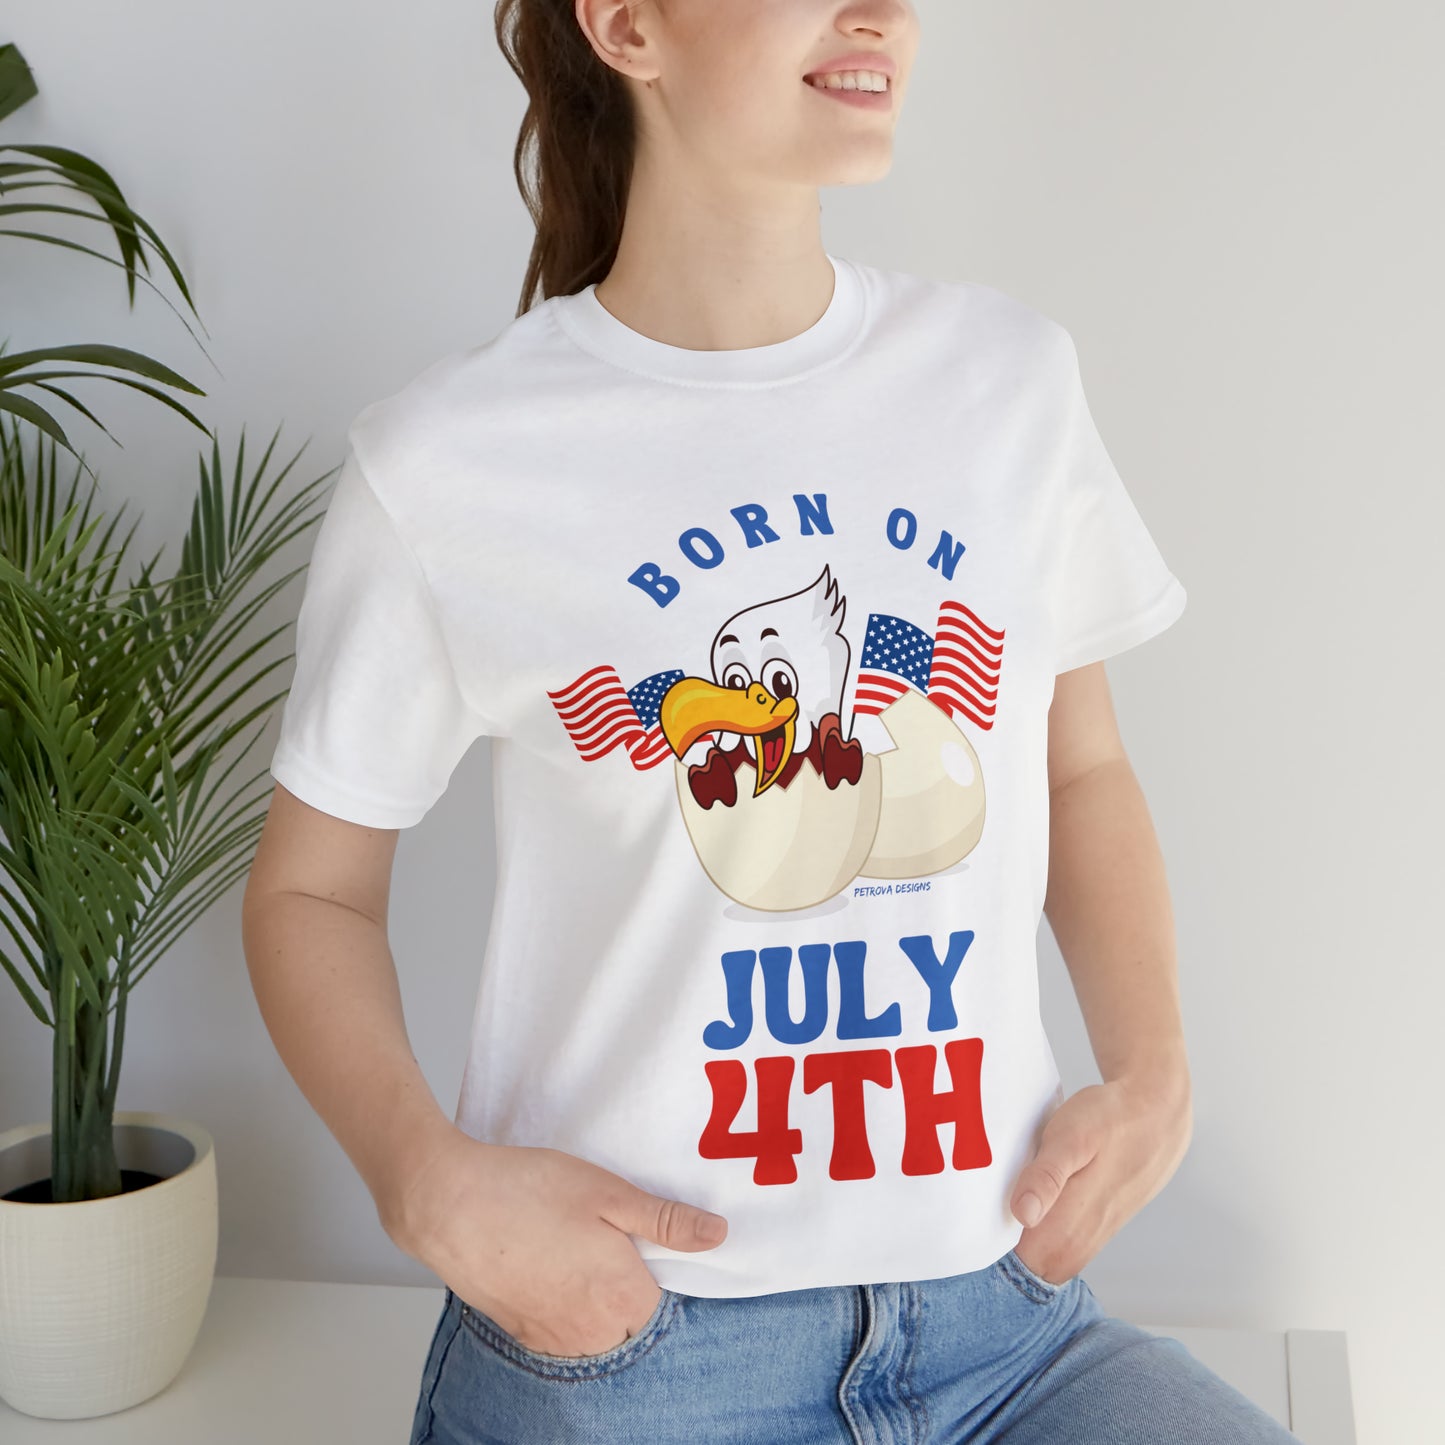 White T-Shirt Tshirt Design Gift for Friend and Family Short Sleeved Shirt 4th of July Independence Day Petrova Designs